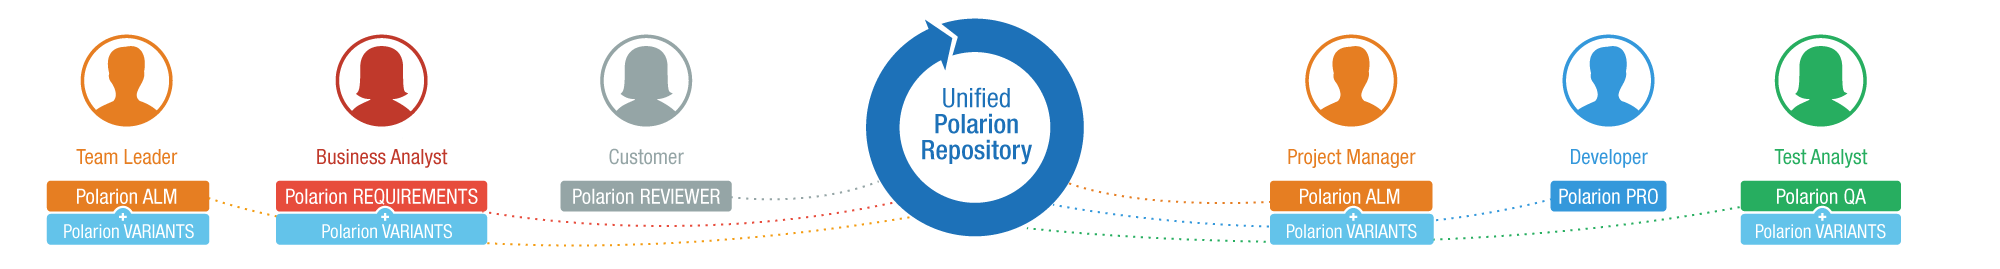 Polarion_Unified_repository.png